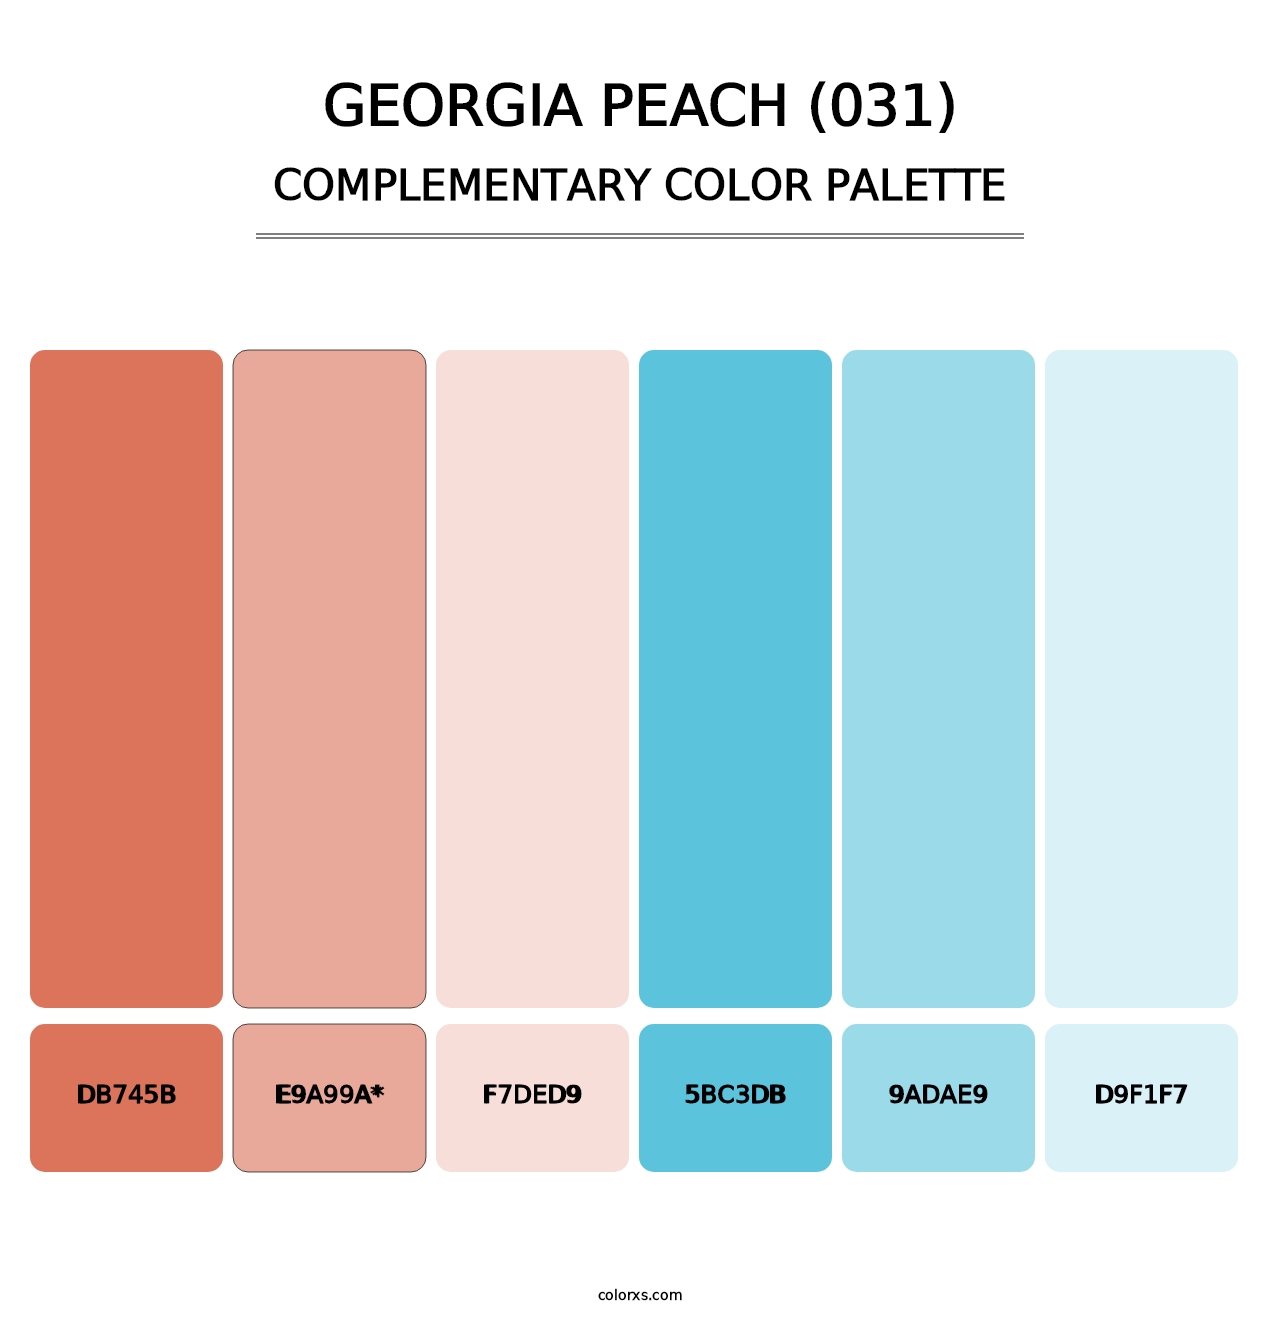 Georgia Peach (031) - Complementary Color Palette